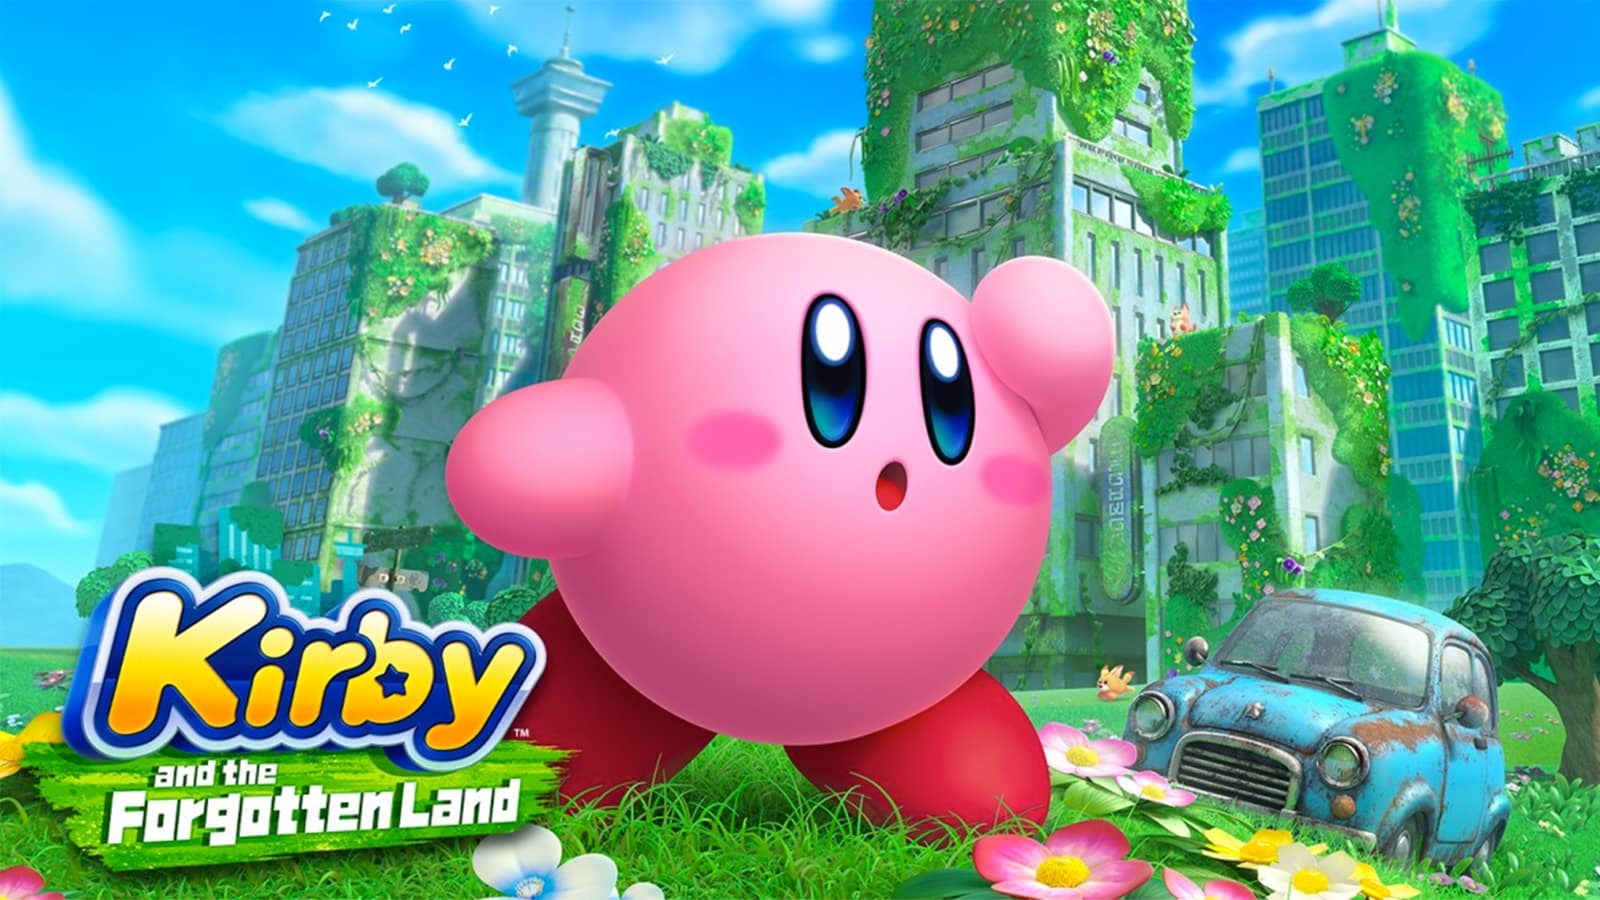 A poster for Kirby and the Forgotten Land's release date